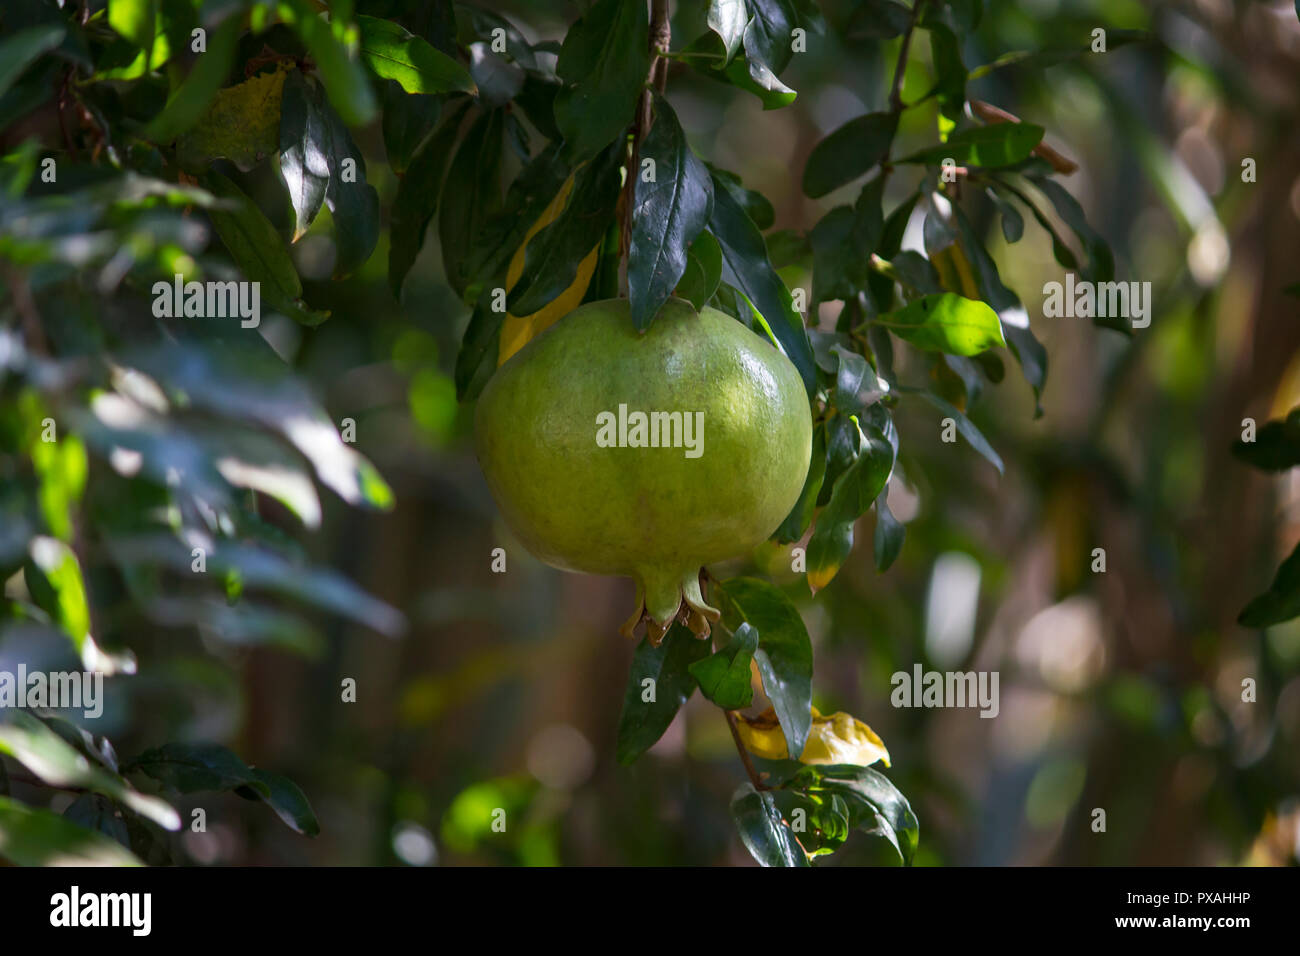 a green pomegranate fruit growing on its tree among green branches Stock Photo